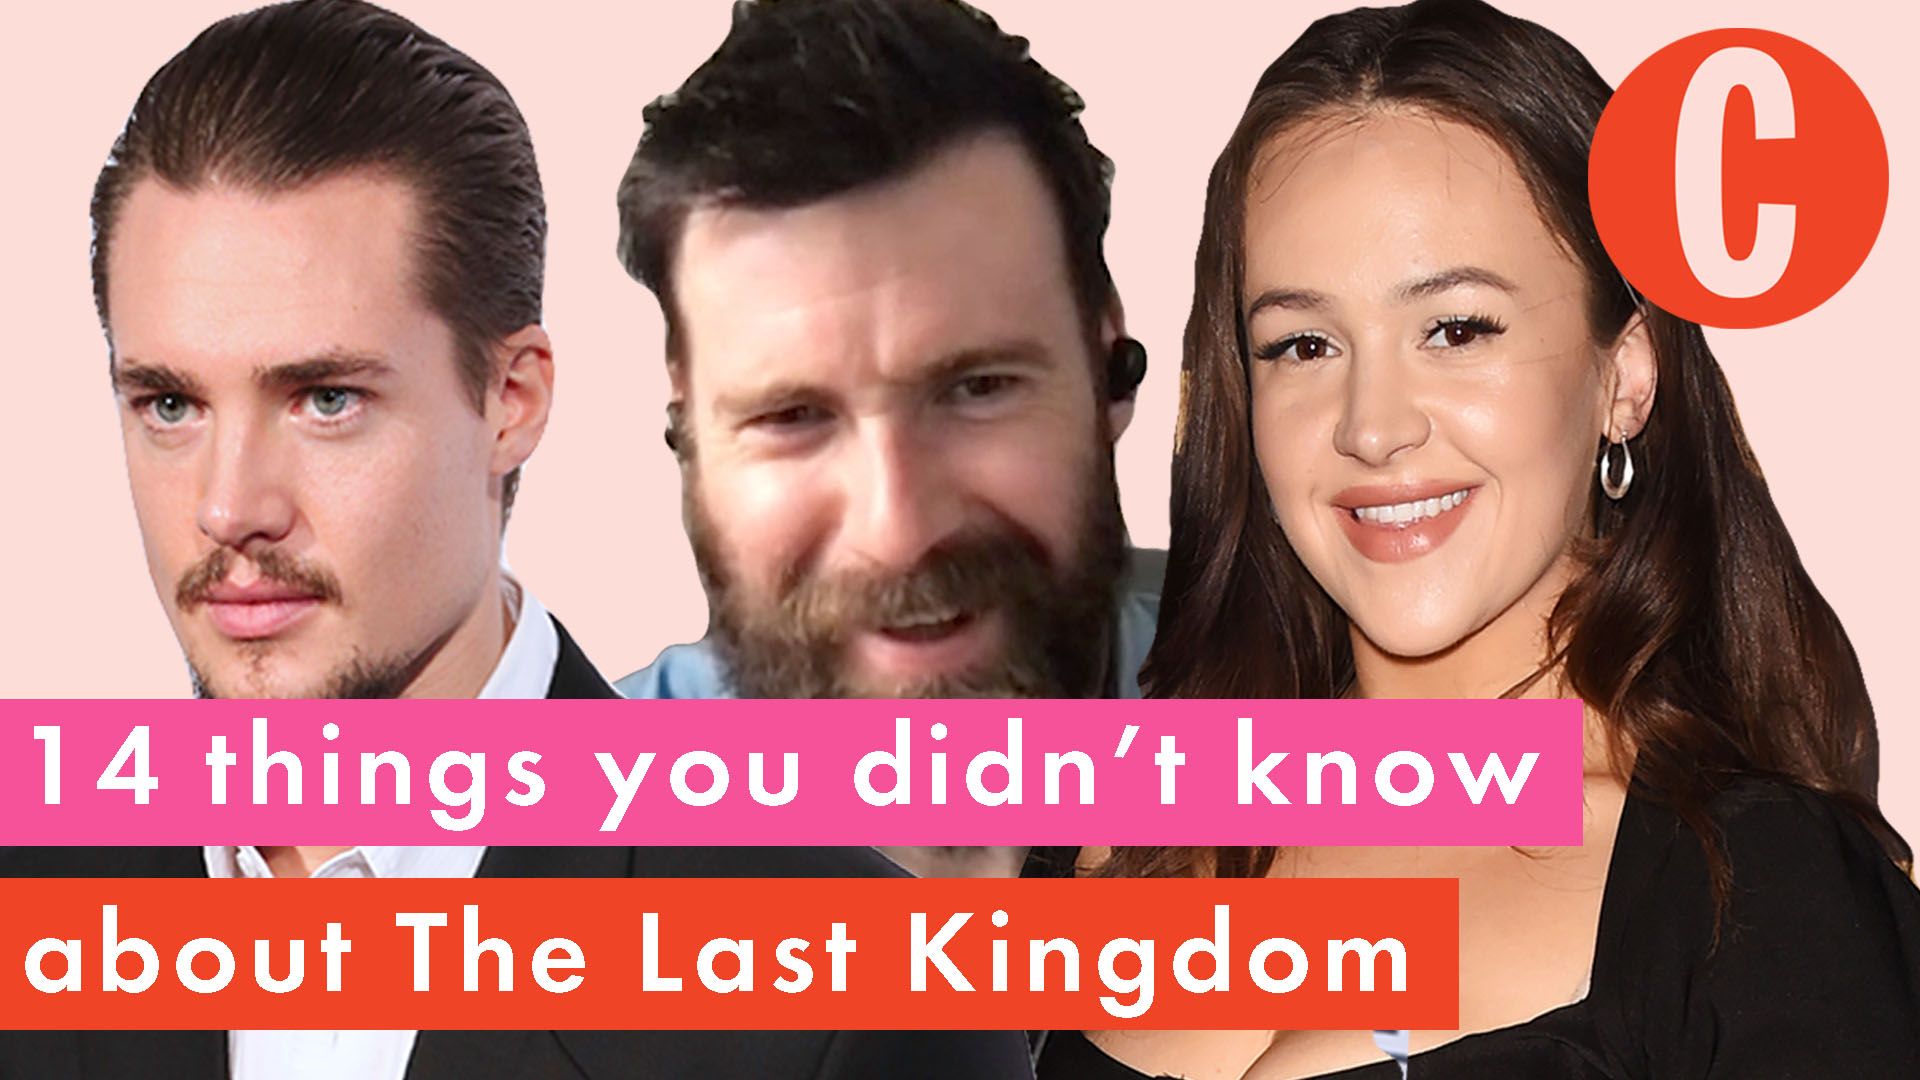 The Last Kingdom film: Release date, cast and trailer